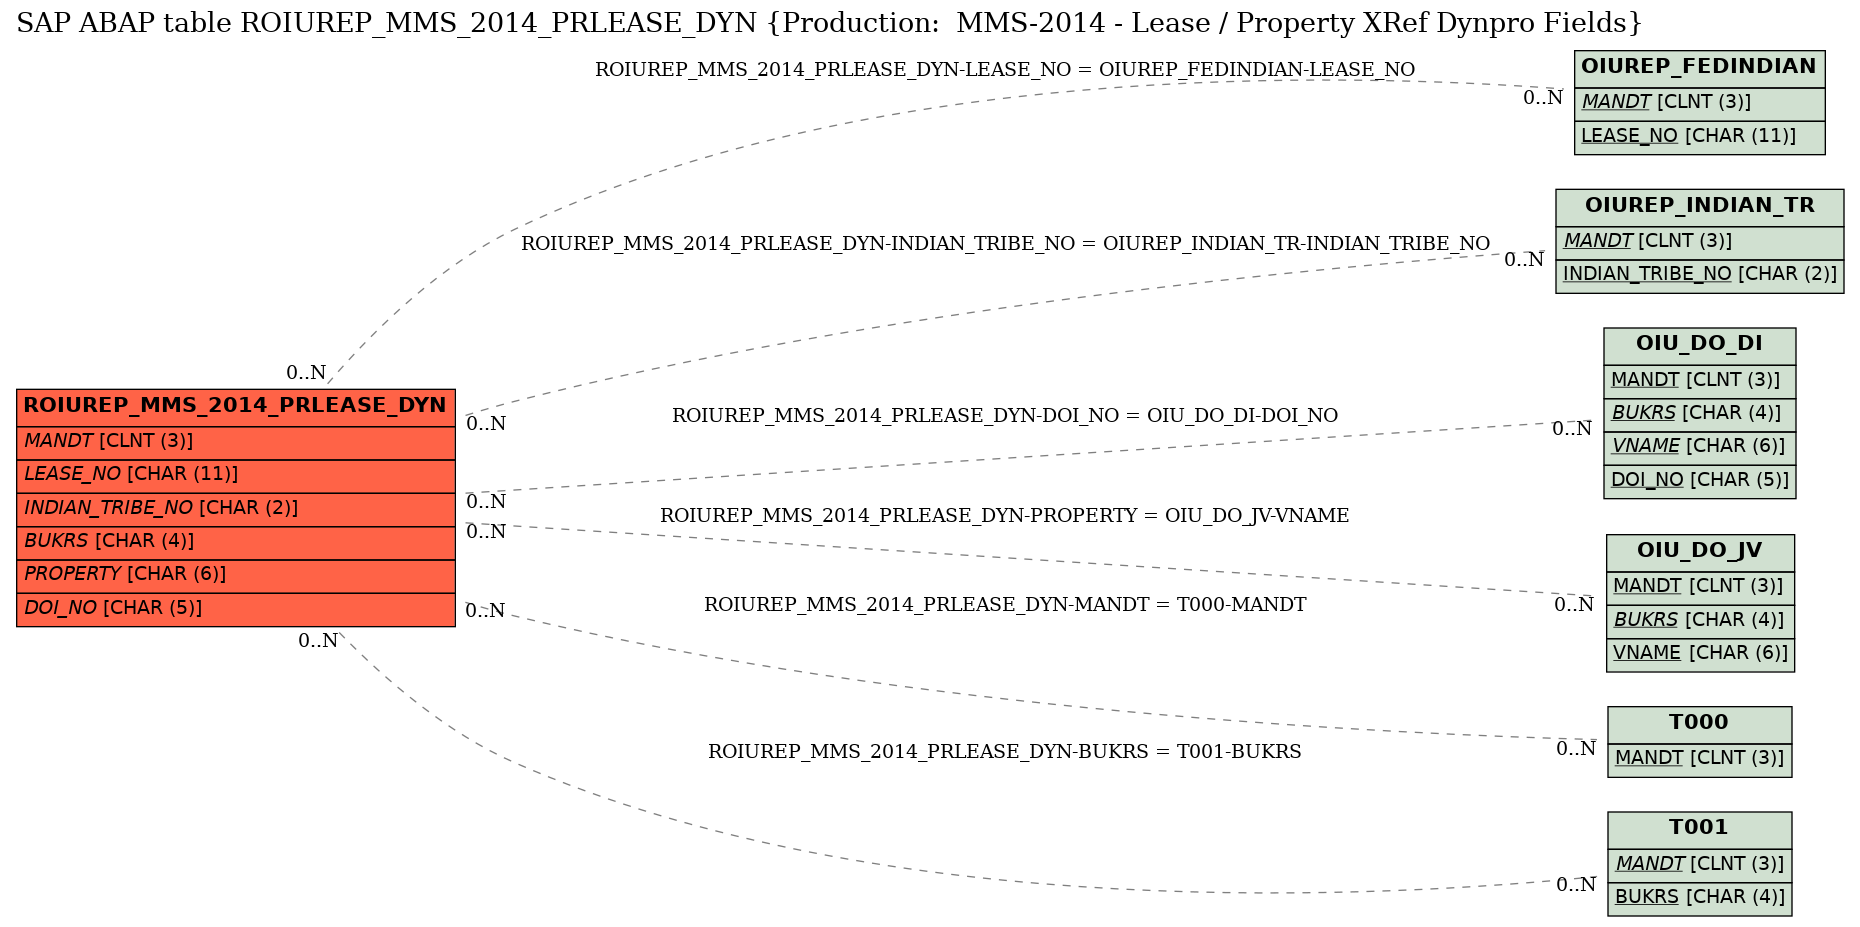 E-R Diagram for table ROIUREP_MMS_2014_PRLEASE_DYN (Production:  MMS-2014 - Lease / Property XRef Dynpro Fields)